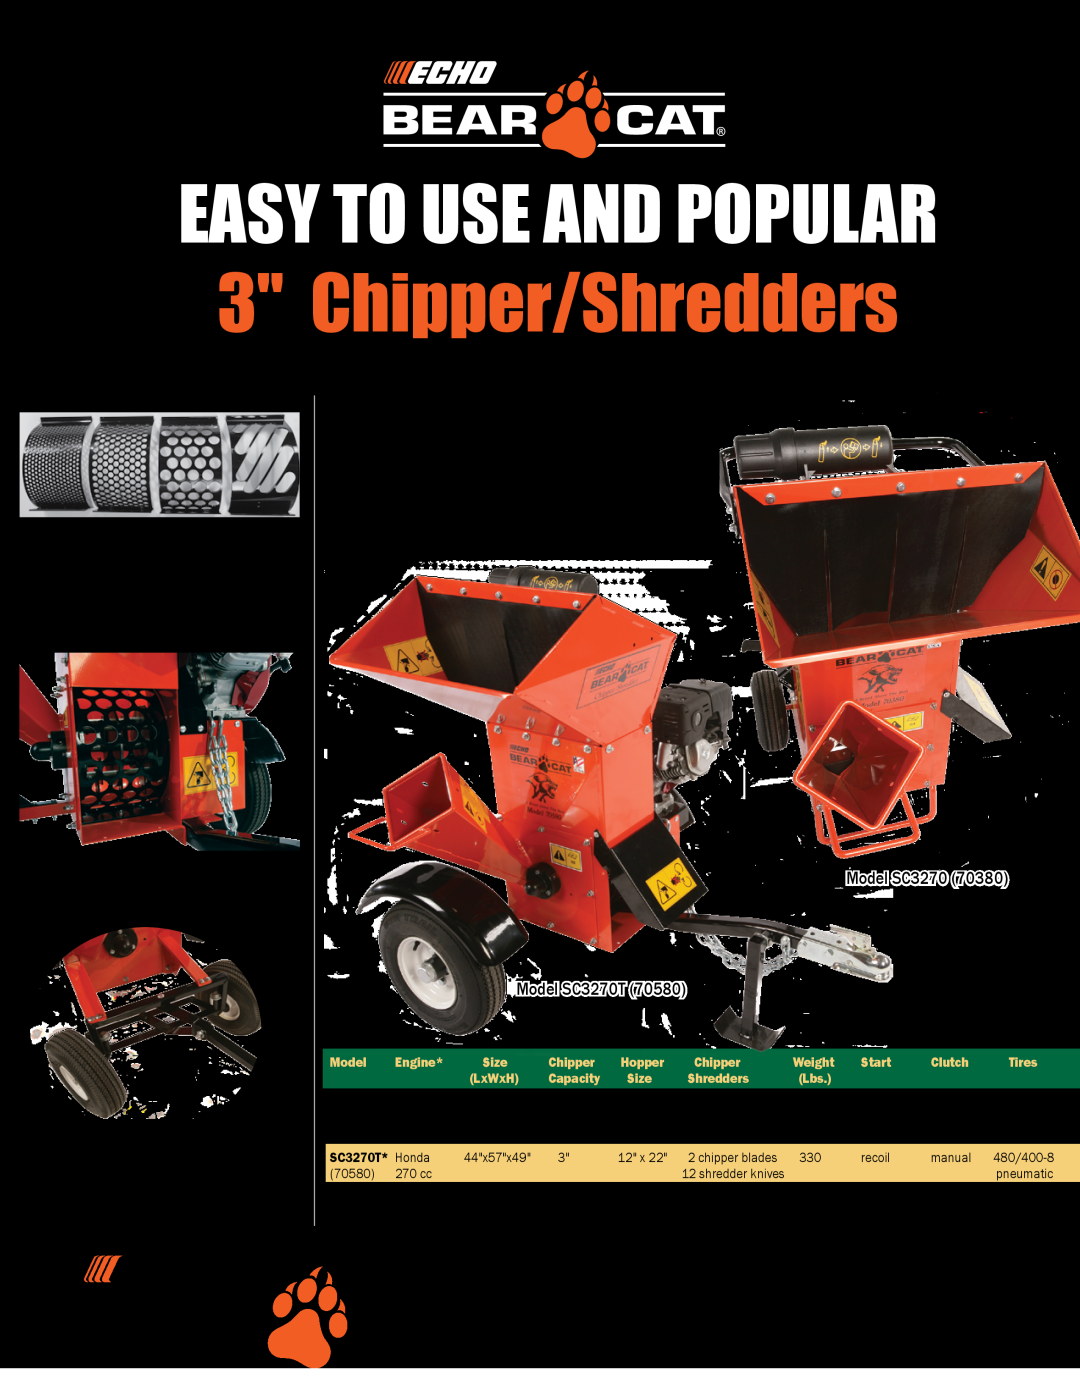 Echo Bear Cat SC3270T (70580) manual Chipper/Shredders, Find a dealer near you, Call us at 800.247.7335 or, Model, Engine 